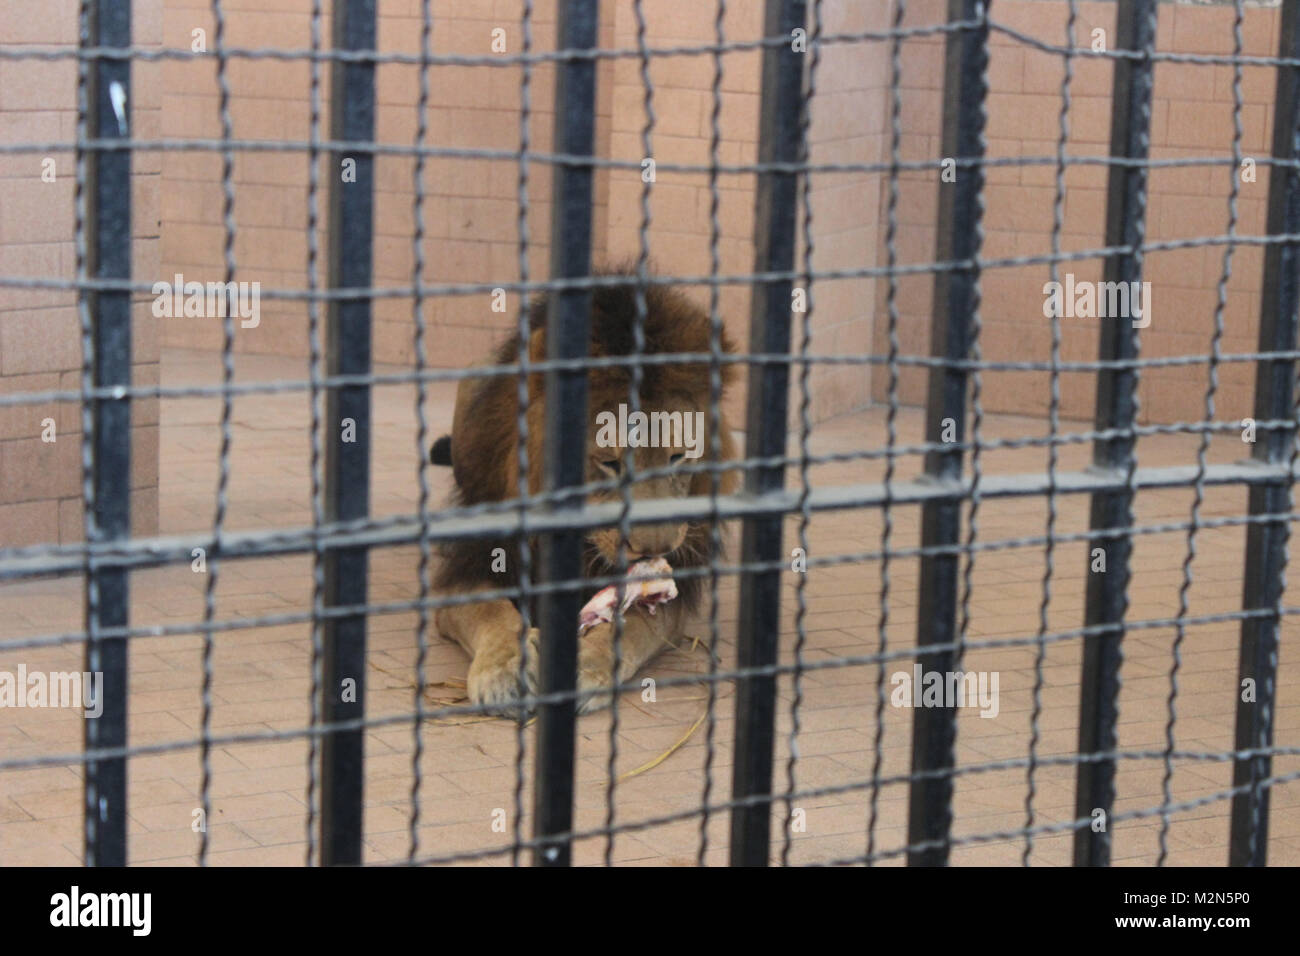 Lion eating meat in its cage. Stock Photo